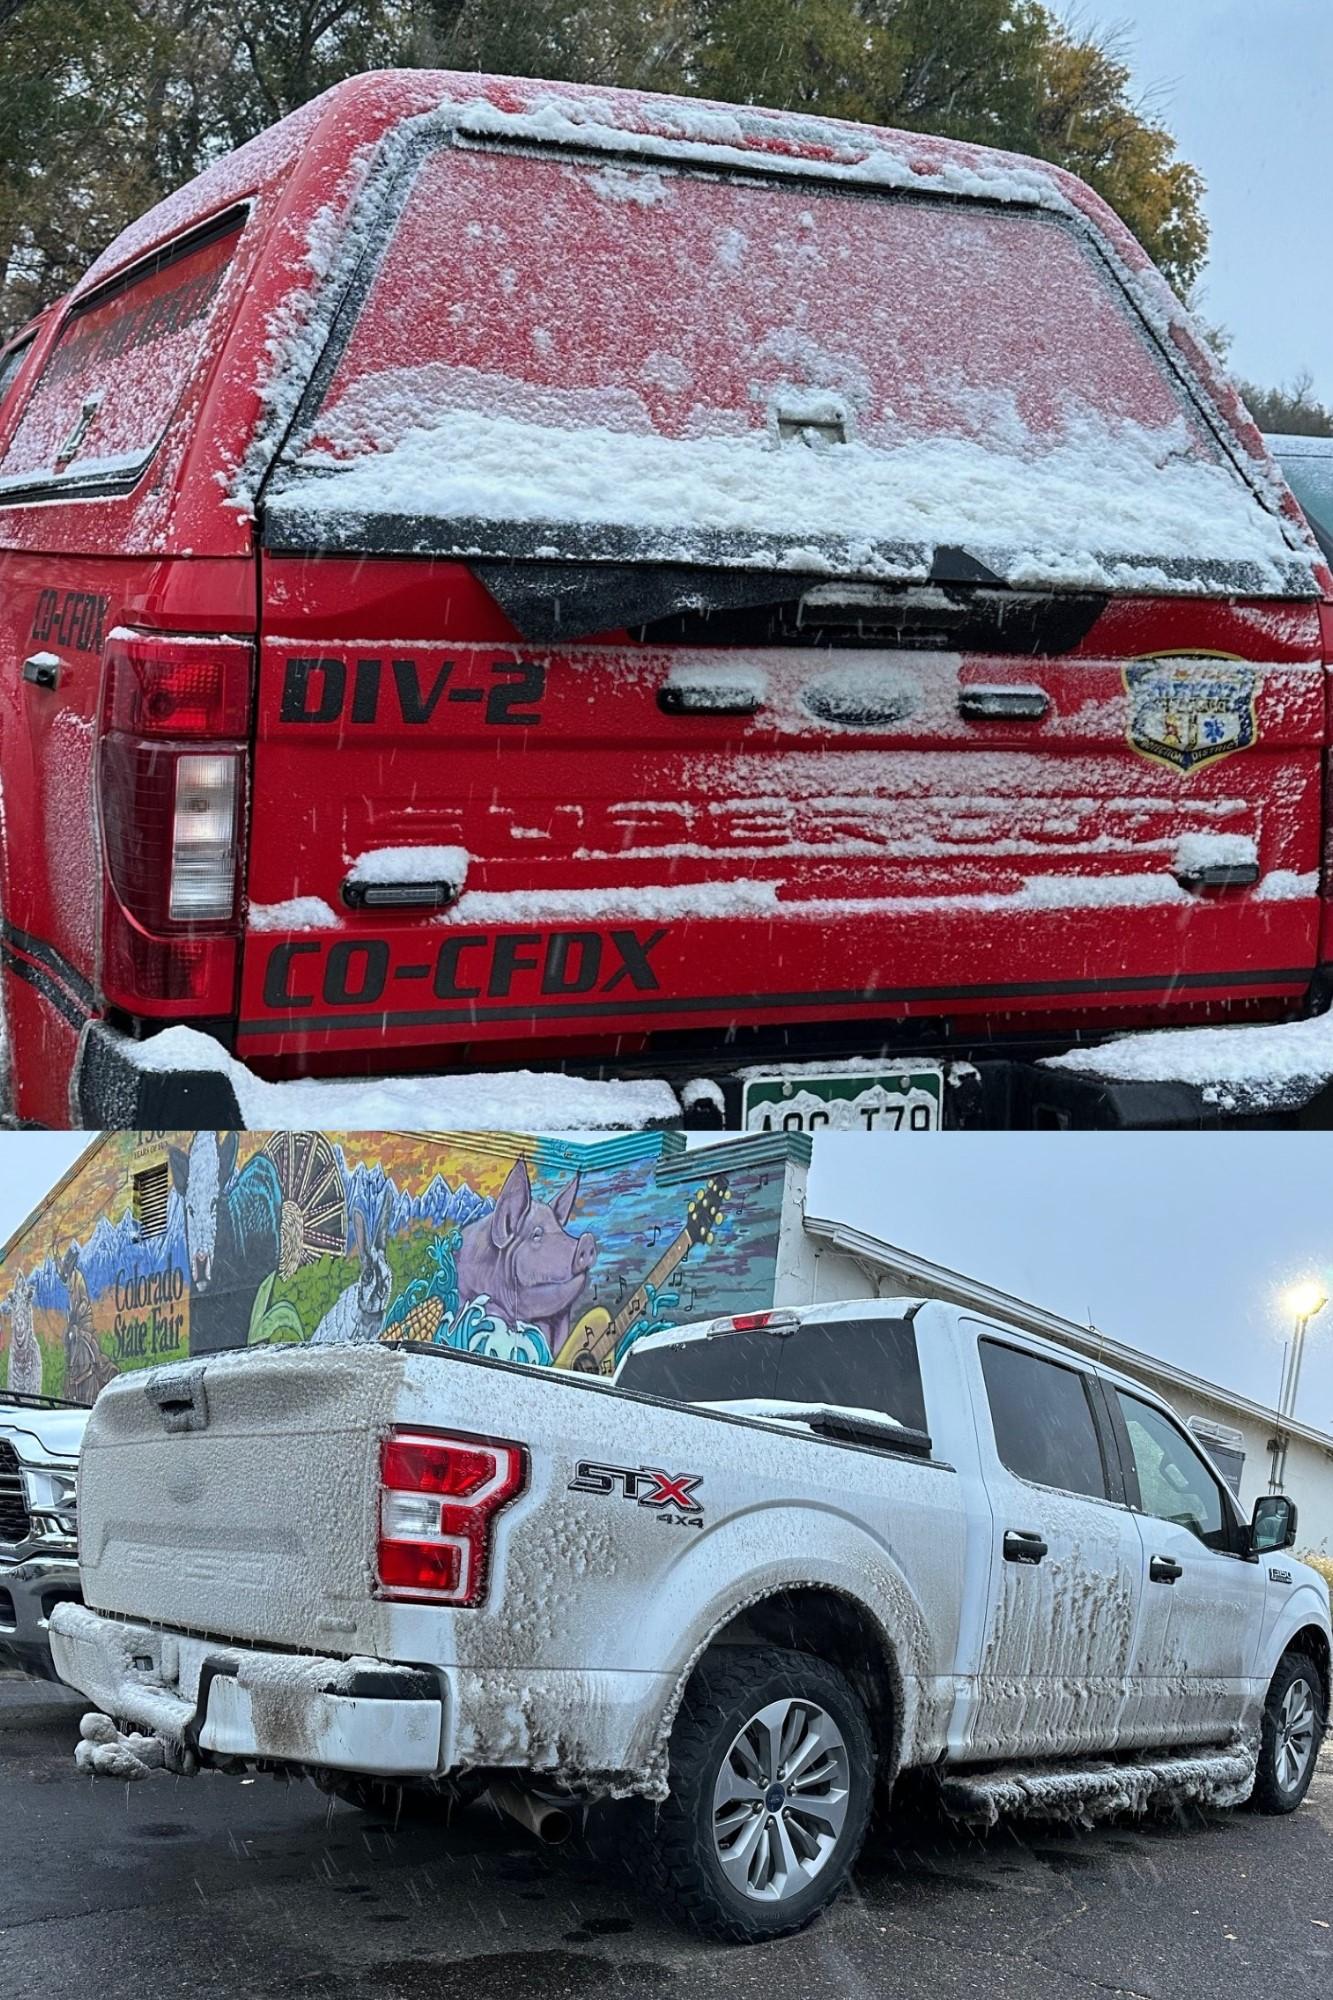 Snowy morning on the Saint Charles Fire. Collage picture of agency vehicles with snow and ice on them.